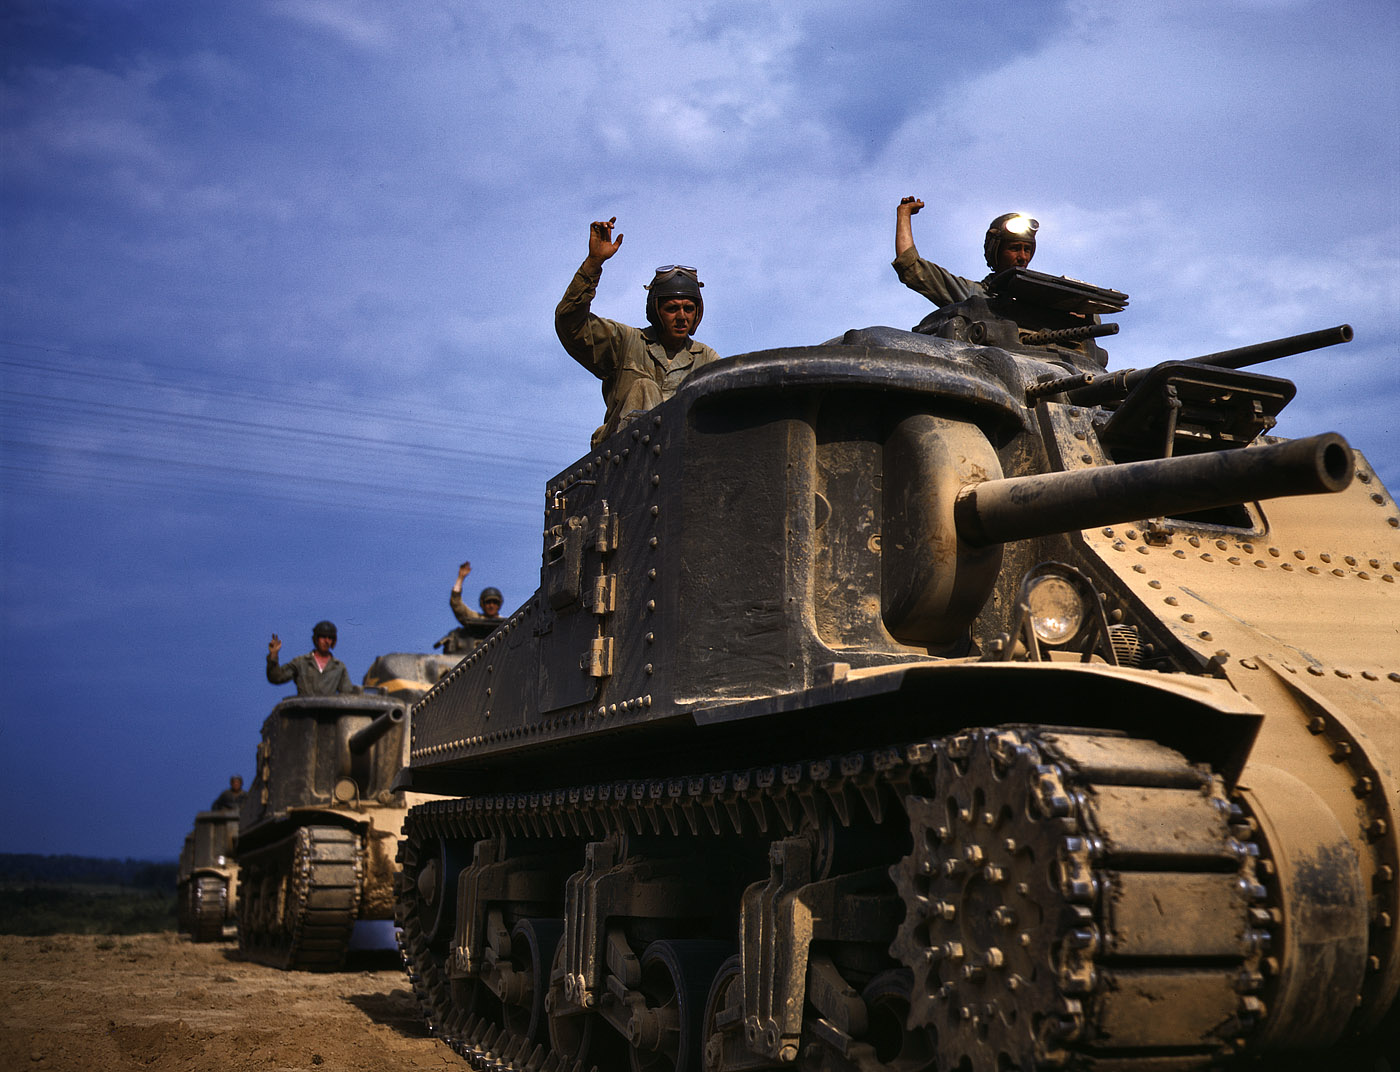 June 1942. M-3 tank crews at Fort Knox, Kentucky. View full size. 4x5 Kodachrome transparency by Alfred Palmer, Office of War Information.